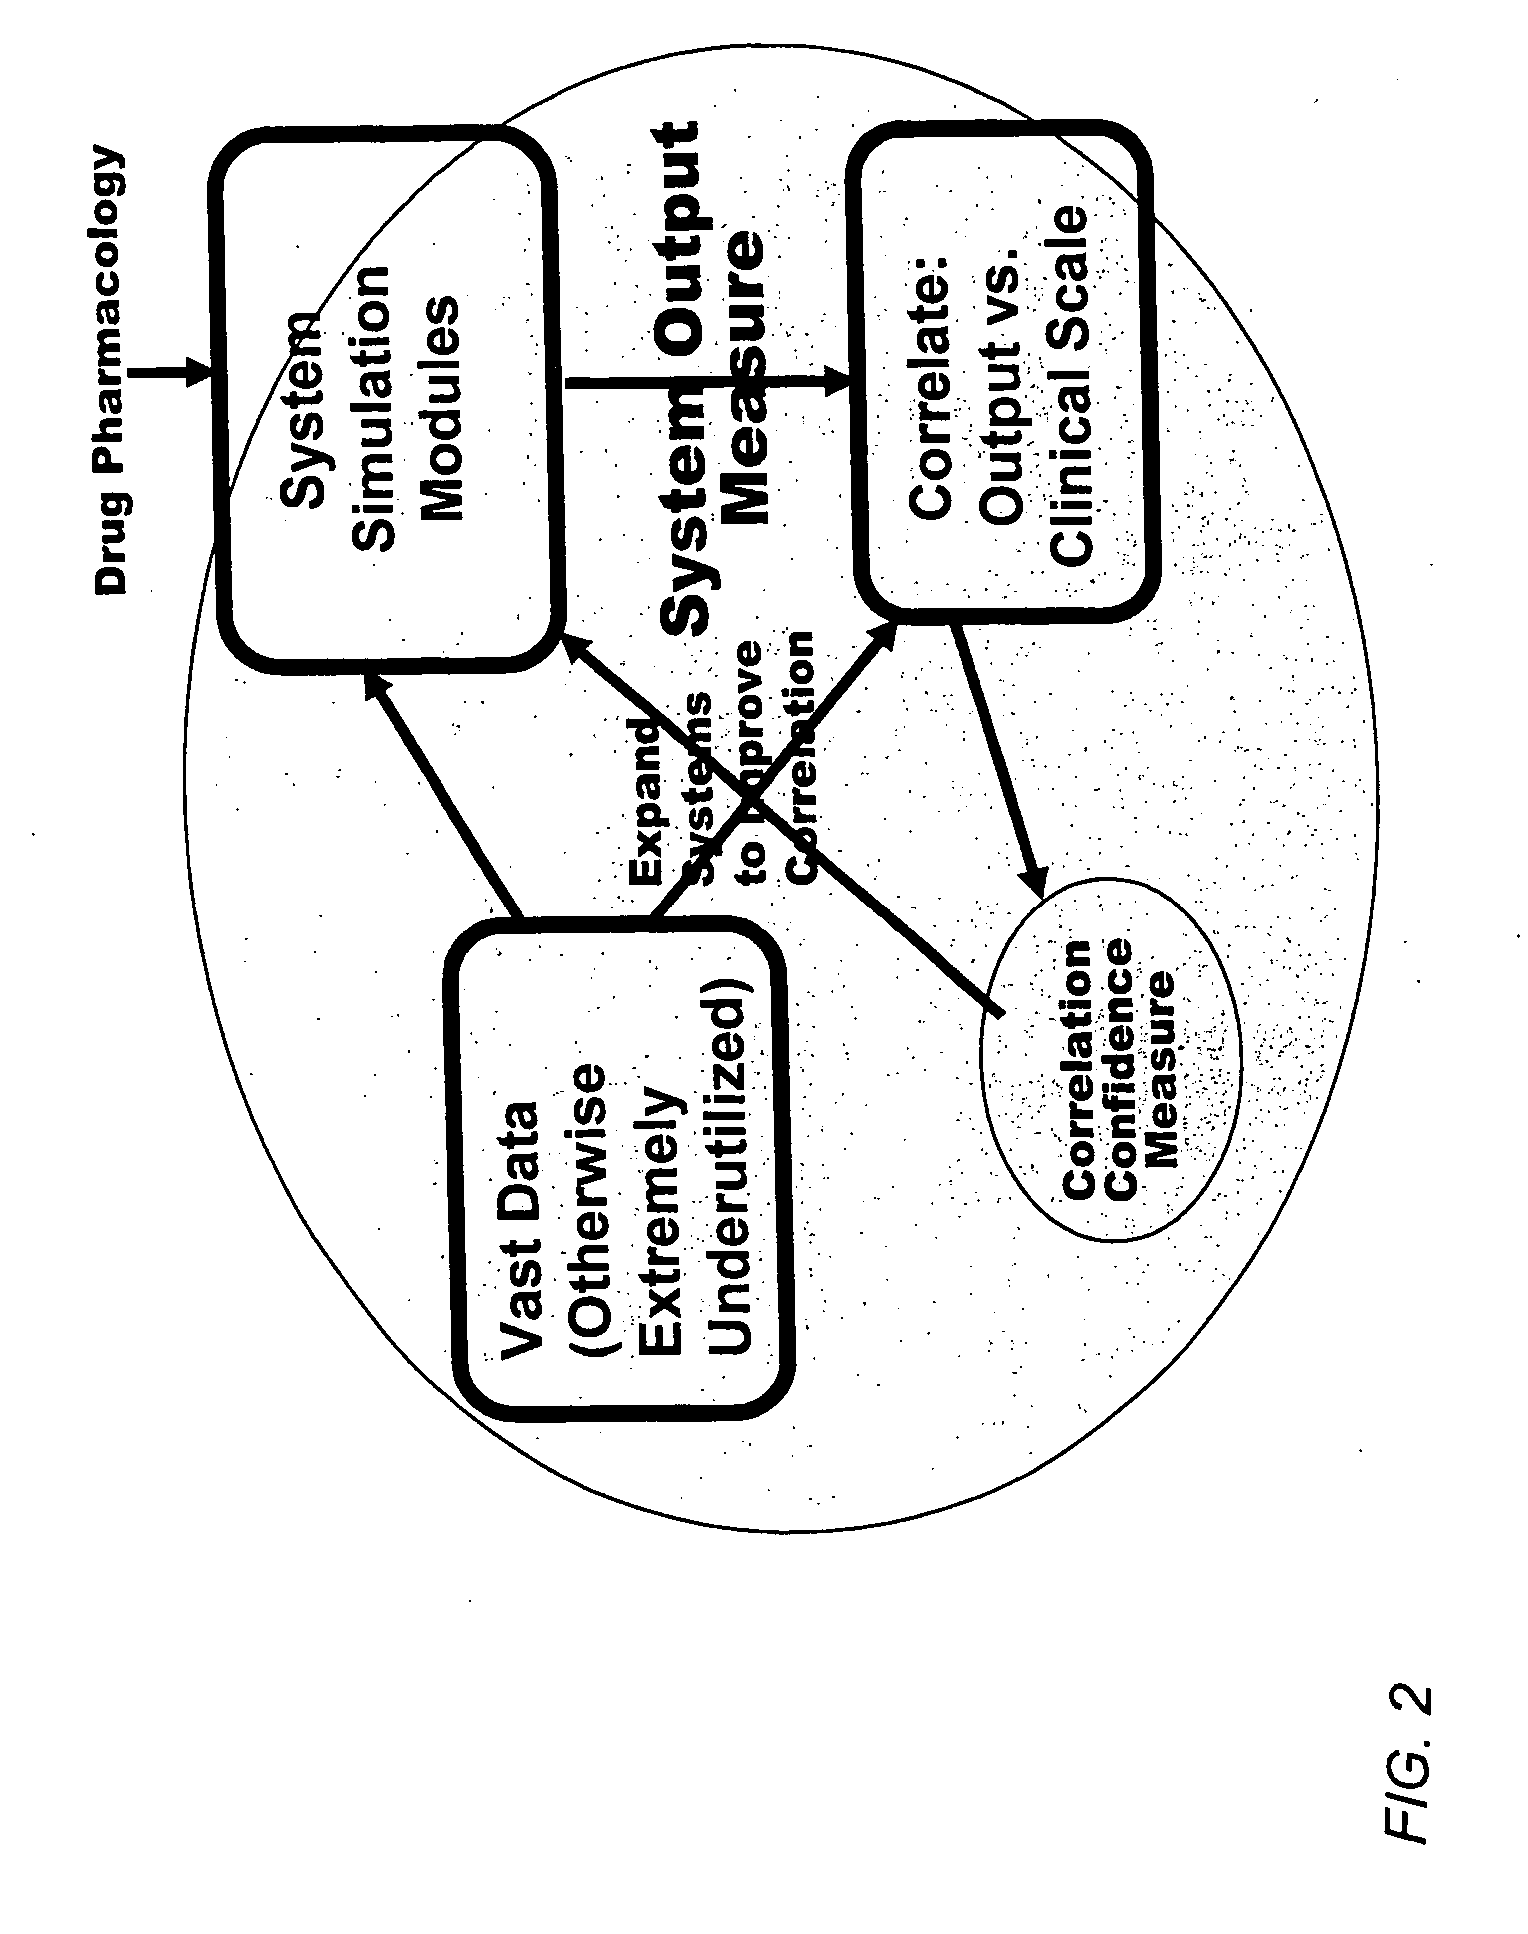 Method and apparatus for computer modeling of the interaction between and among cortical and subcortical areas in the human brain for the purpose of predicting the effect of drugs in psychiatric & cognitive diseases